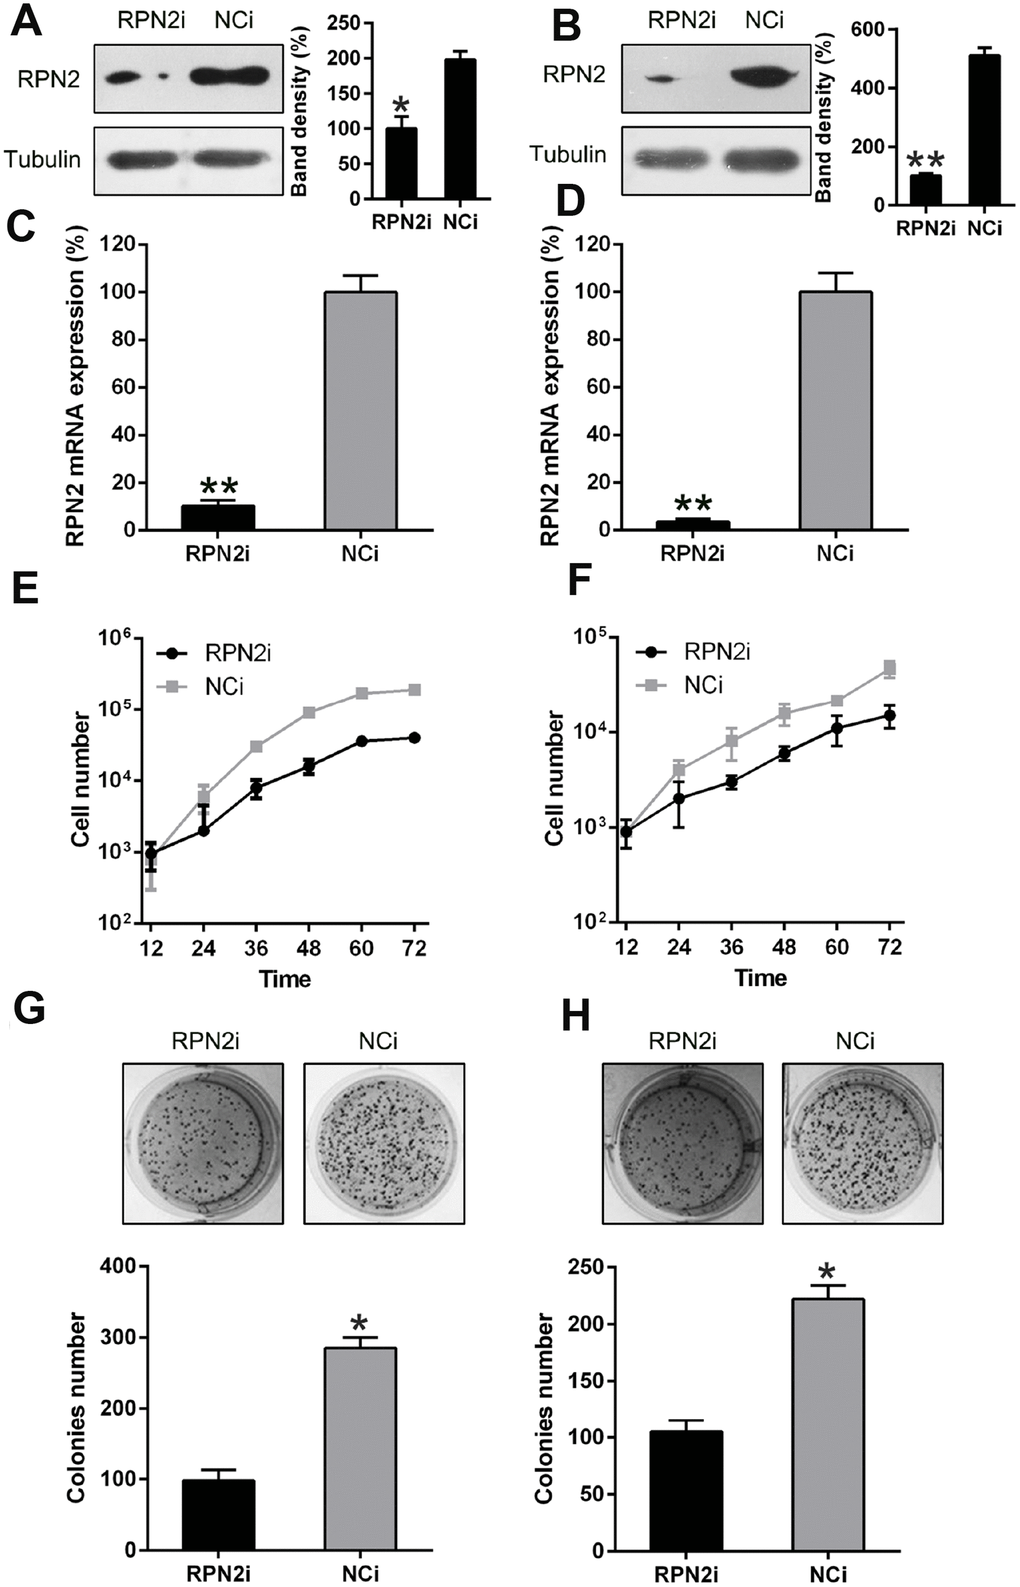 RPN2 silencing restrained HCC cell proliferation. Western blotting (A, B) and qPCR (C, D) were conducted to confirm the silencing of RPN2 in both cell lines. (E, F) multiplication rate of Huh-7 and HepG2 cells was measured at the time points of 12, 24, 36, 48, 60, and 72 h after the transfection by using MTT assay. (G, H) Soft agar colony formation test was used to examine the replicative rate of HepG2 and Huh-7 cells transfected with shRNA-RPN2. The band of target protein was normalized to the density of action. The quantification was performed independently in a single band. Data are recorded as mean ± SD. *P P P 